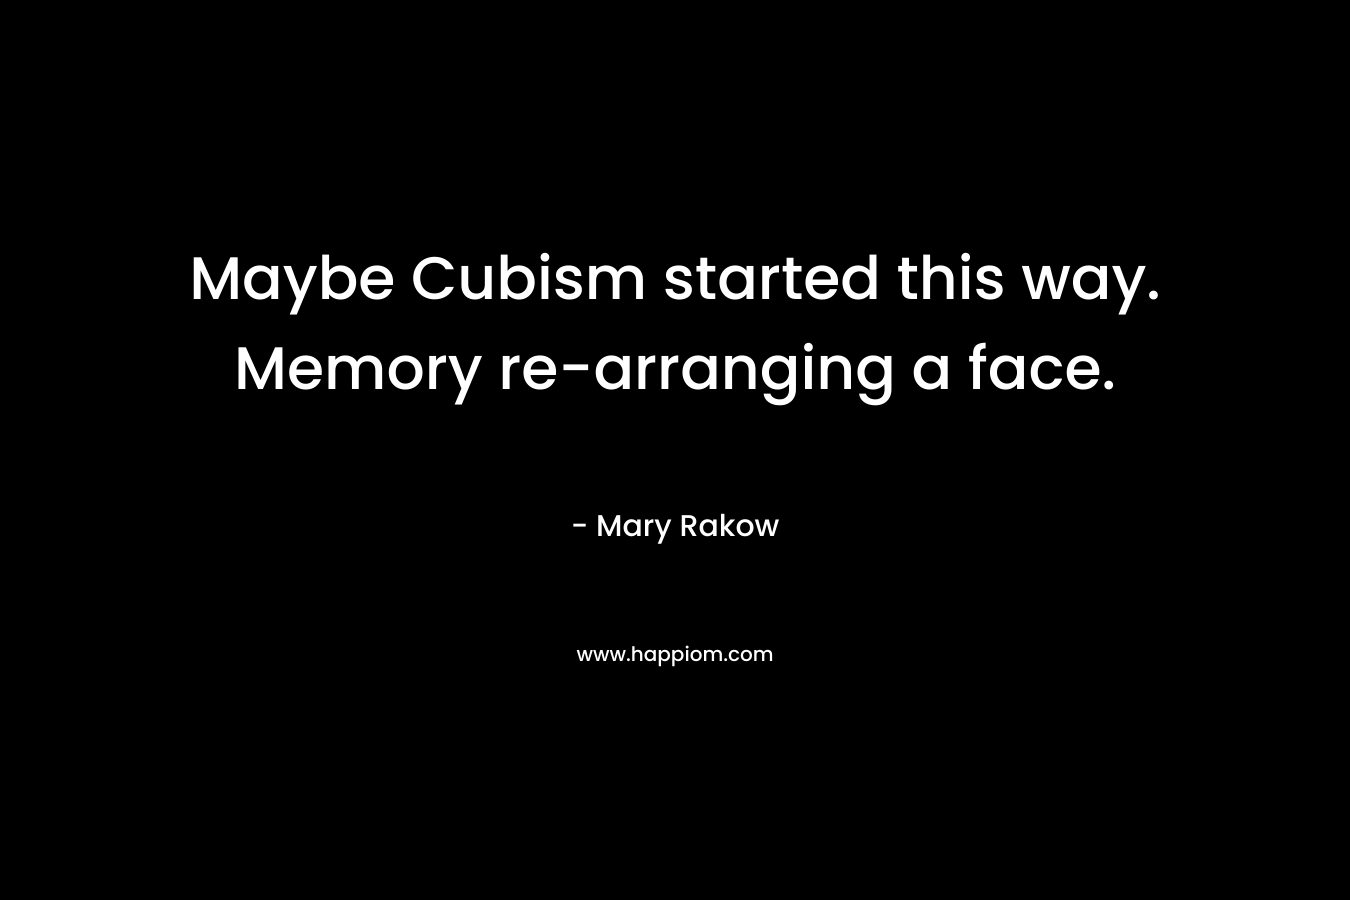 Maybe Cubism started this way. Memory re-arranging a face. – Mary Rakow